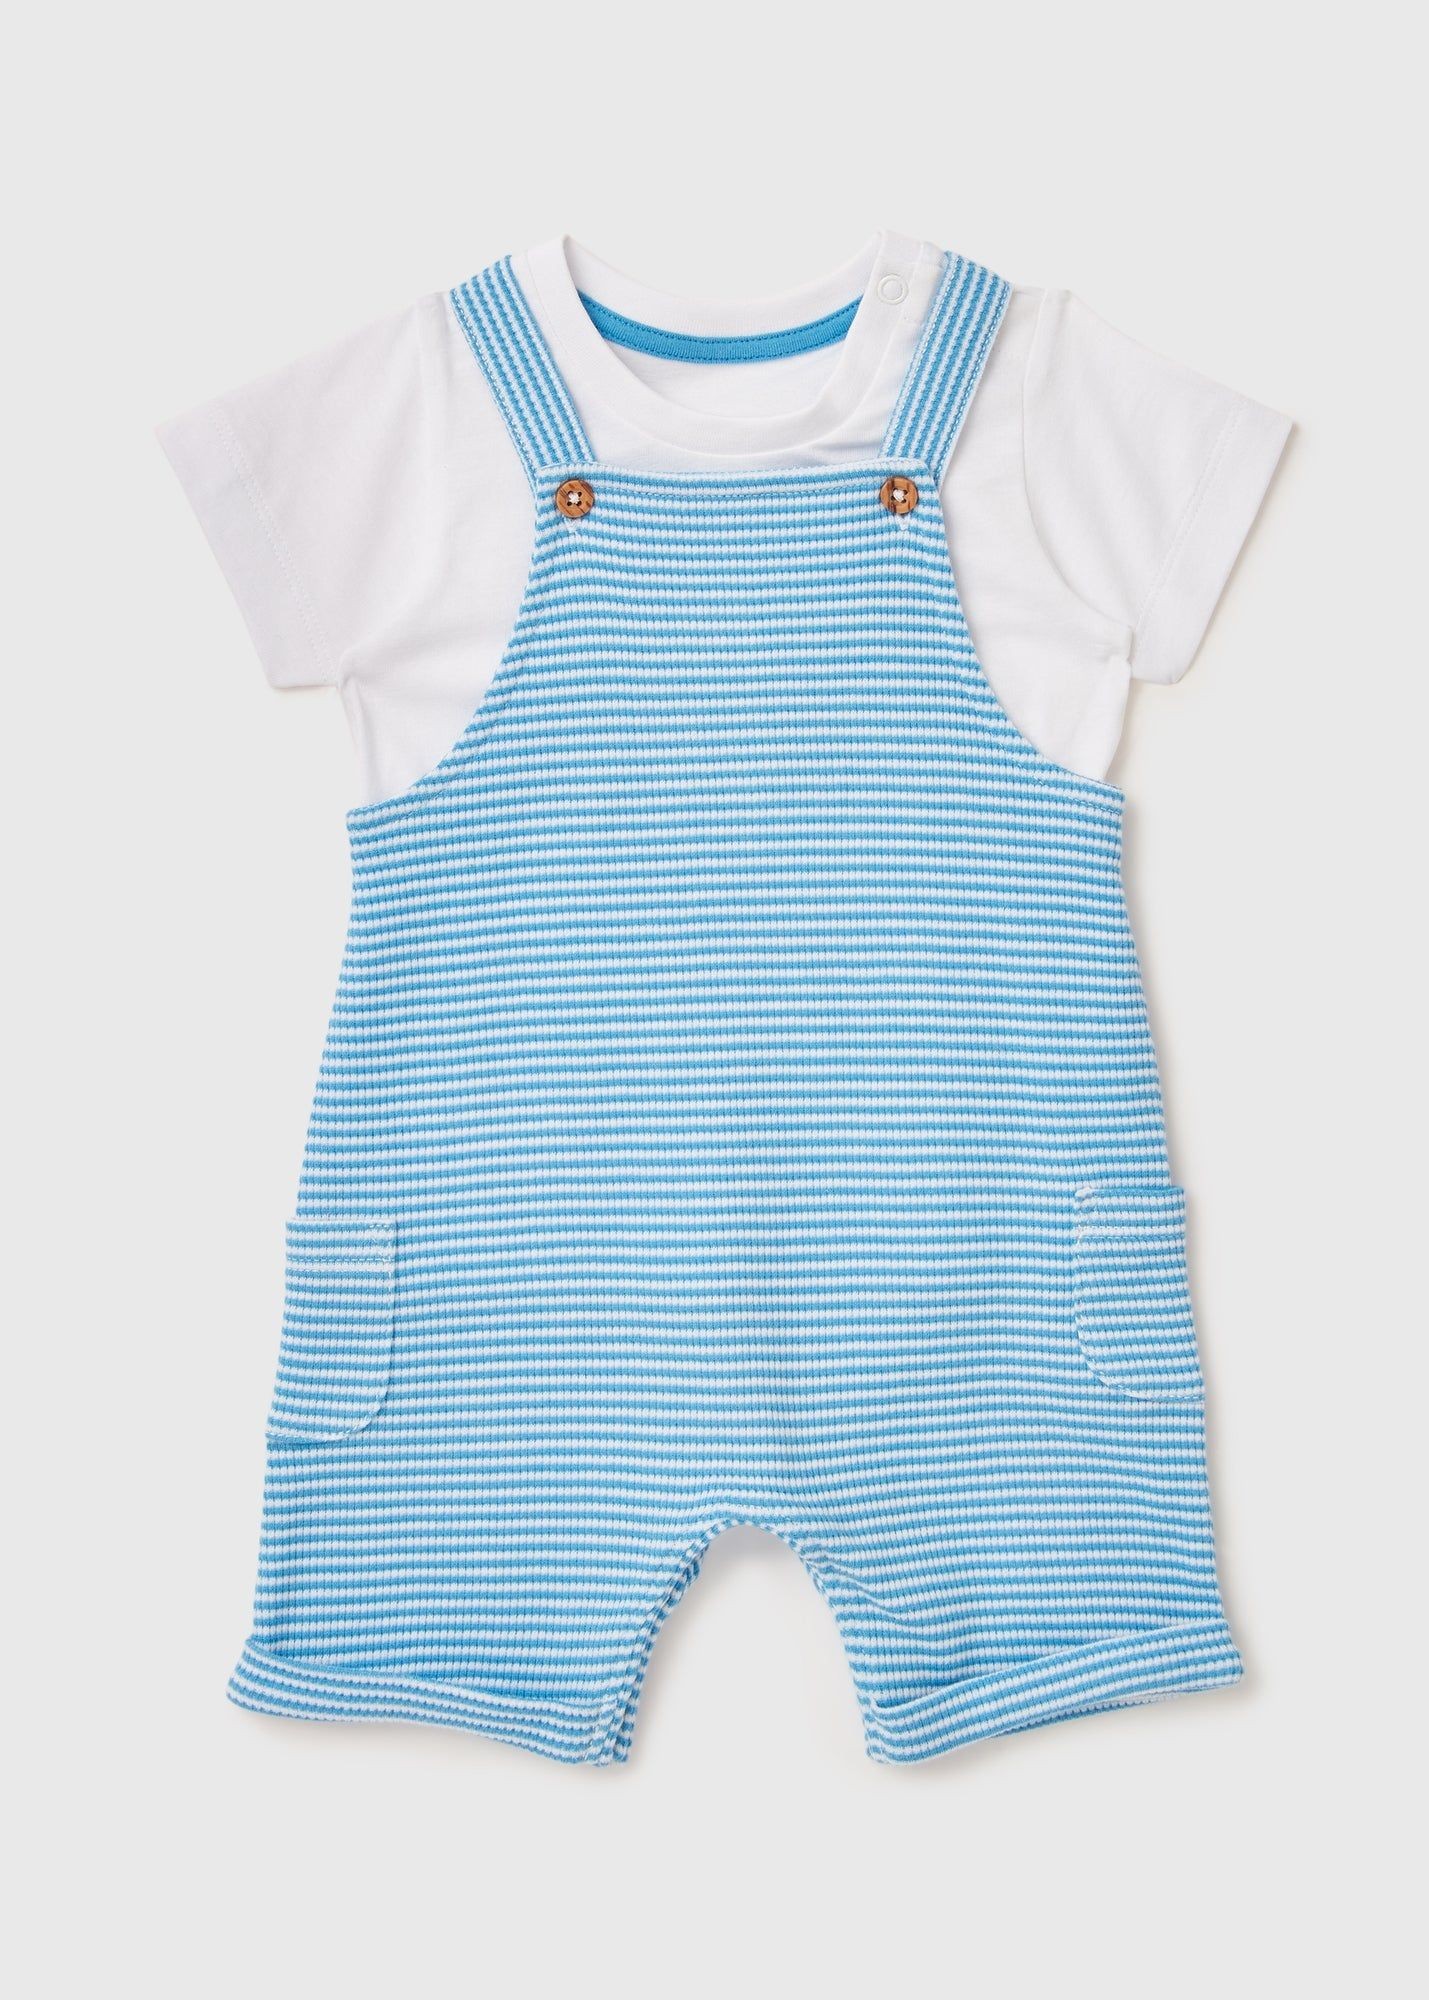 Buy Matalan Baby Clothes & Essentials at Lowest Price in UAE